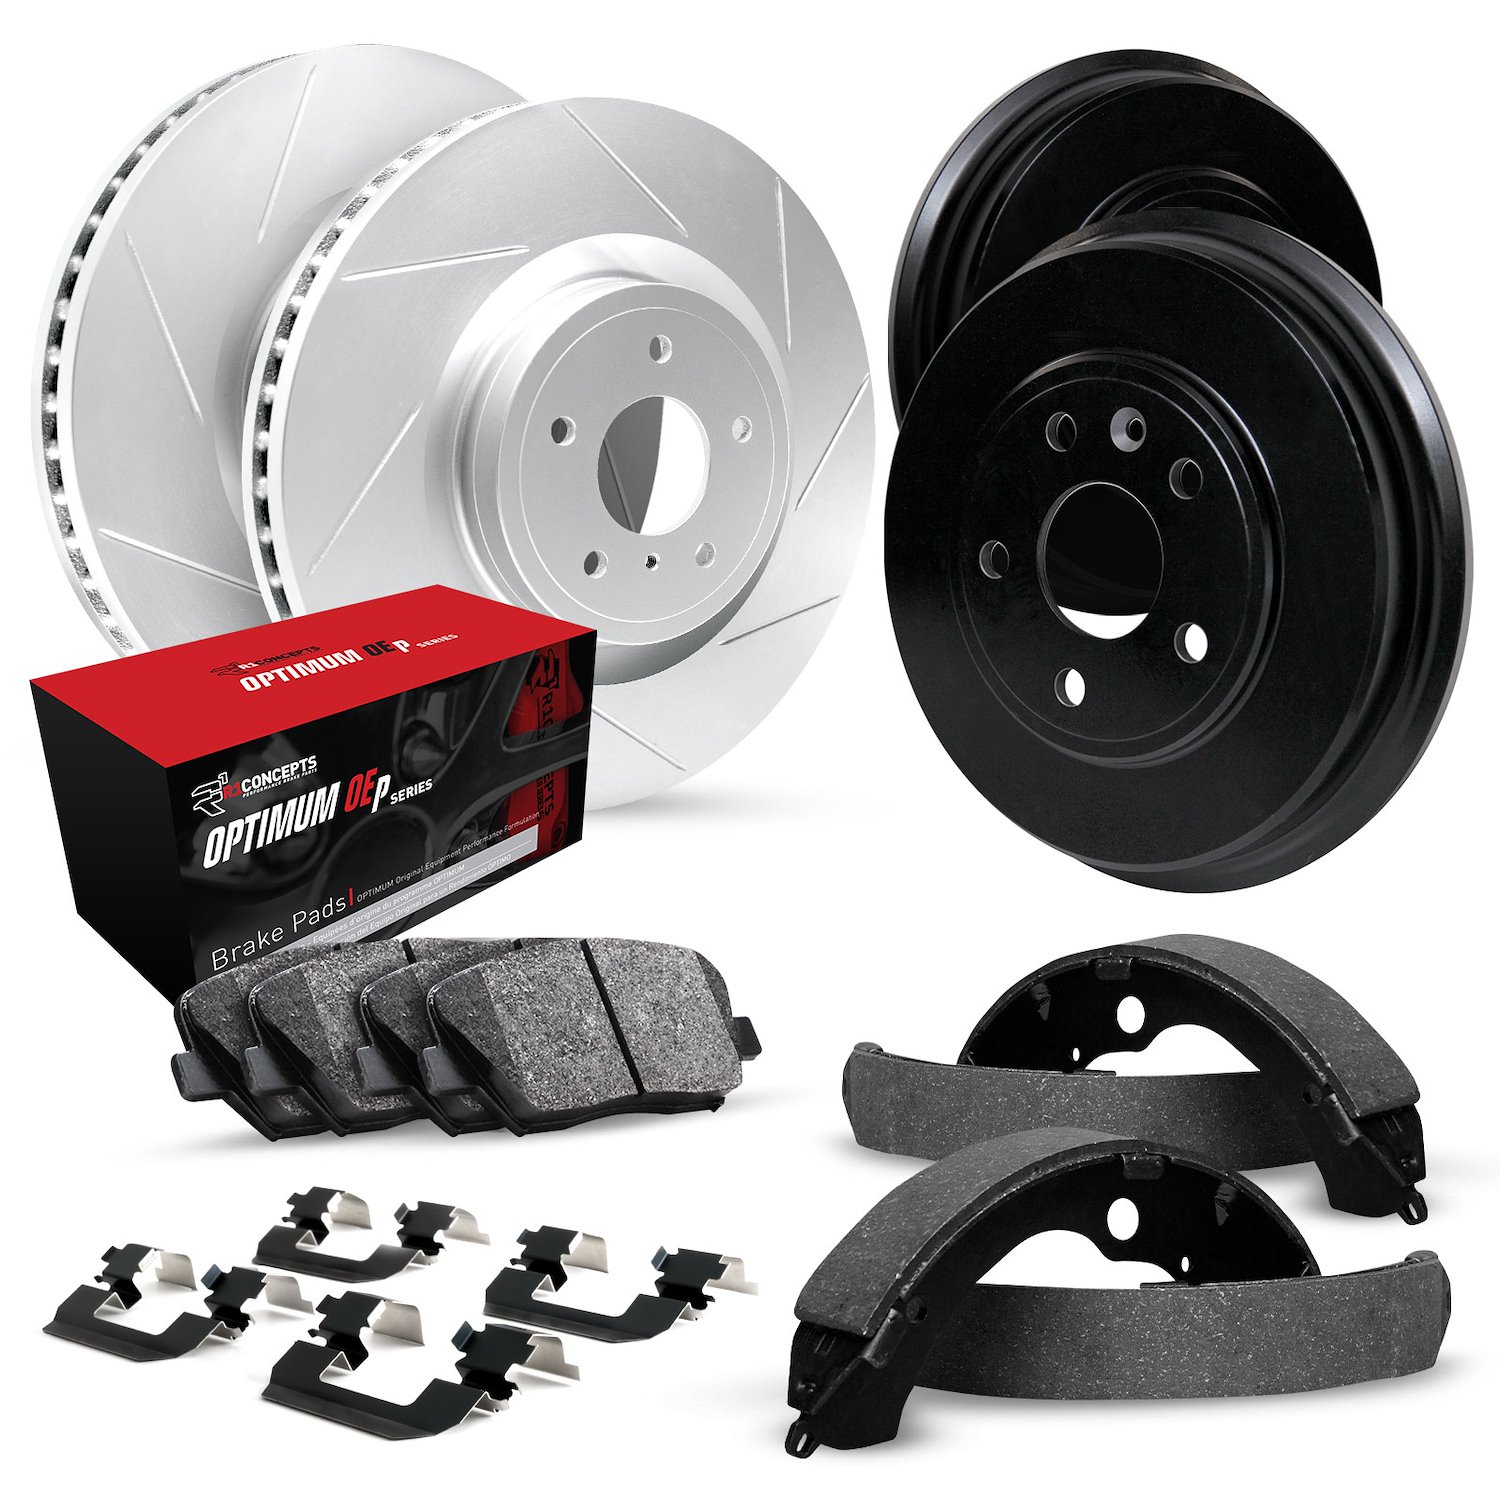 GEO-Carbon Slotted Brake Rotor & Drum Set w/Optimum OE Pads, Shoes, & Hardware, 1987-1993 Ford/Lincoln/Mercury/Mazda